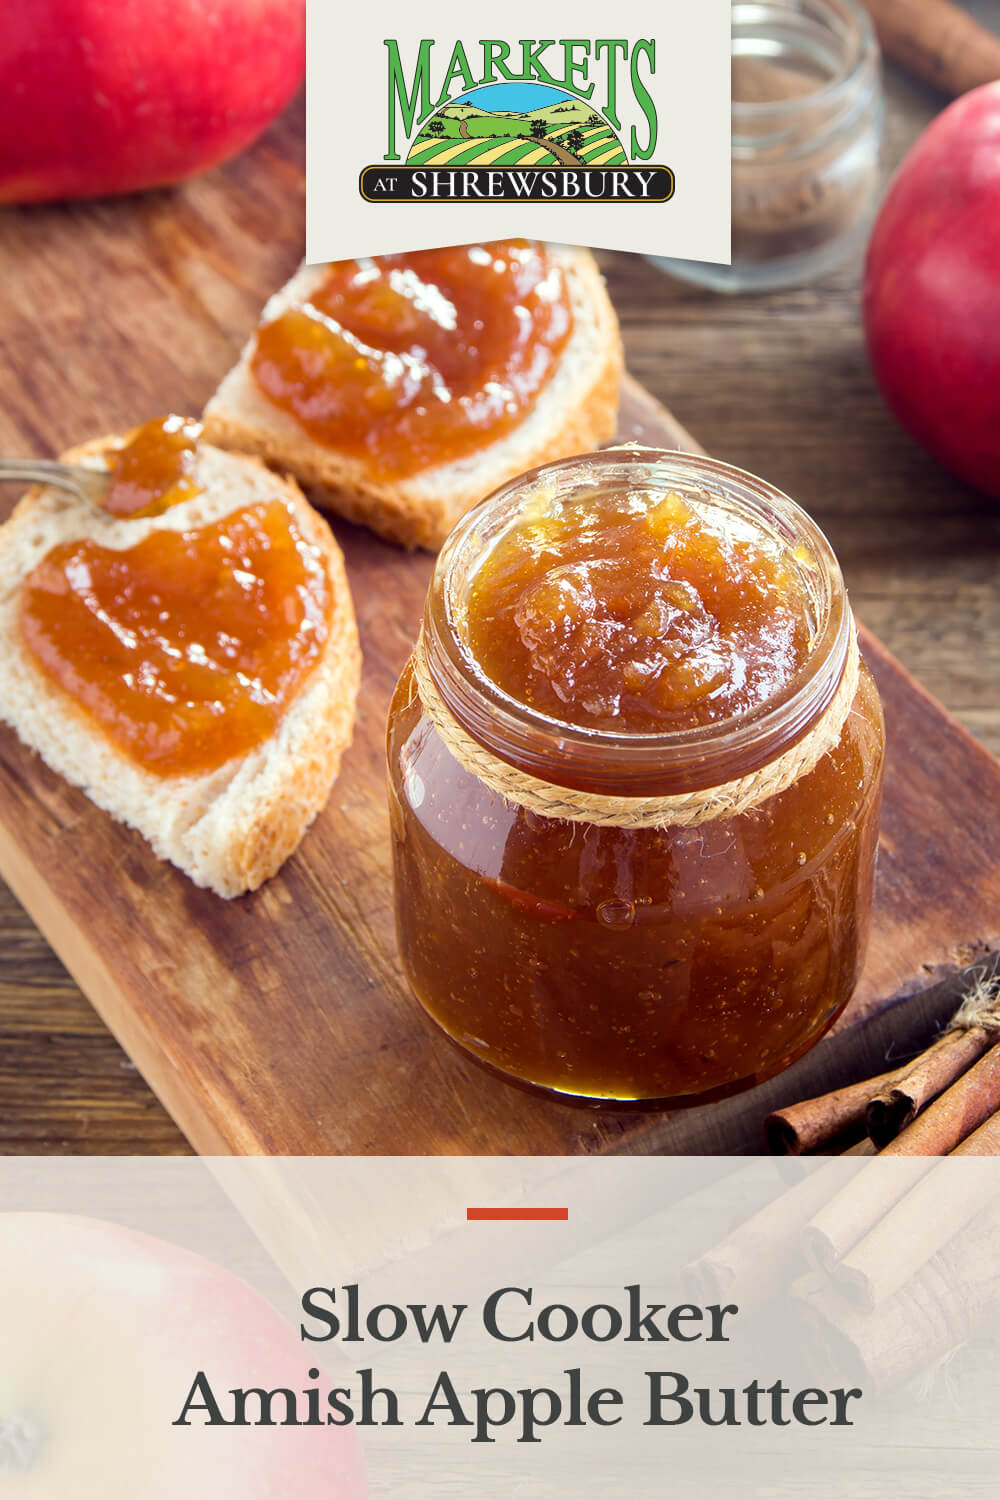 Slow Cooker Amish Apple Butter